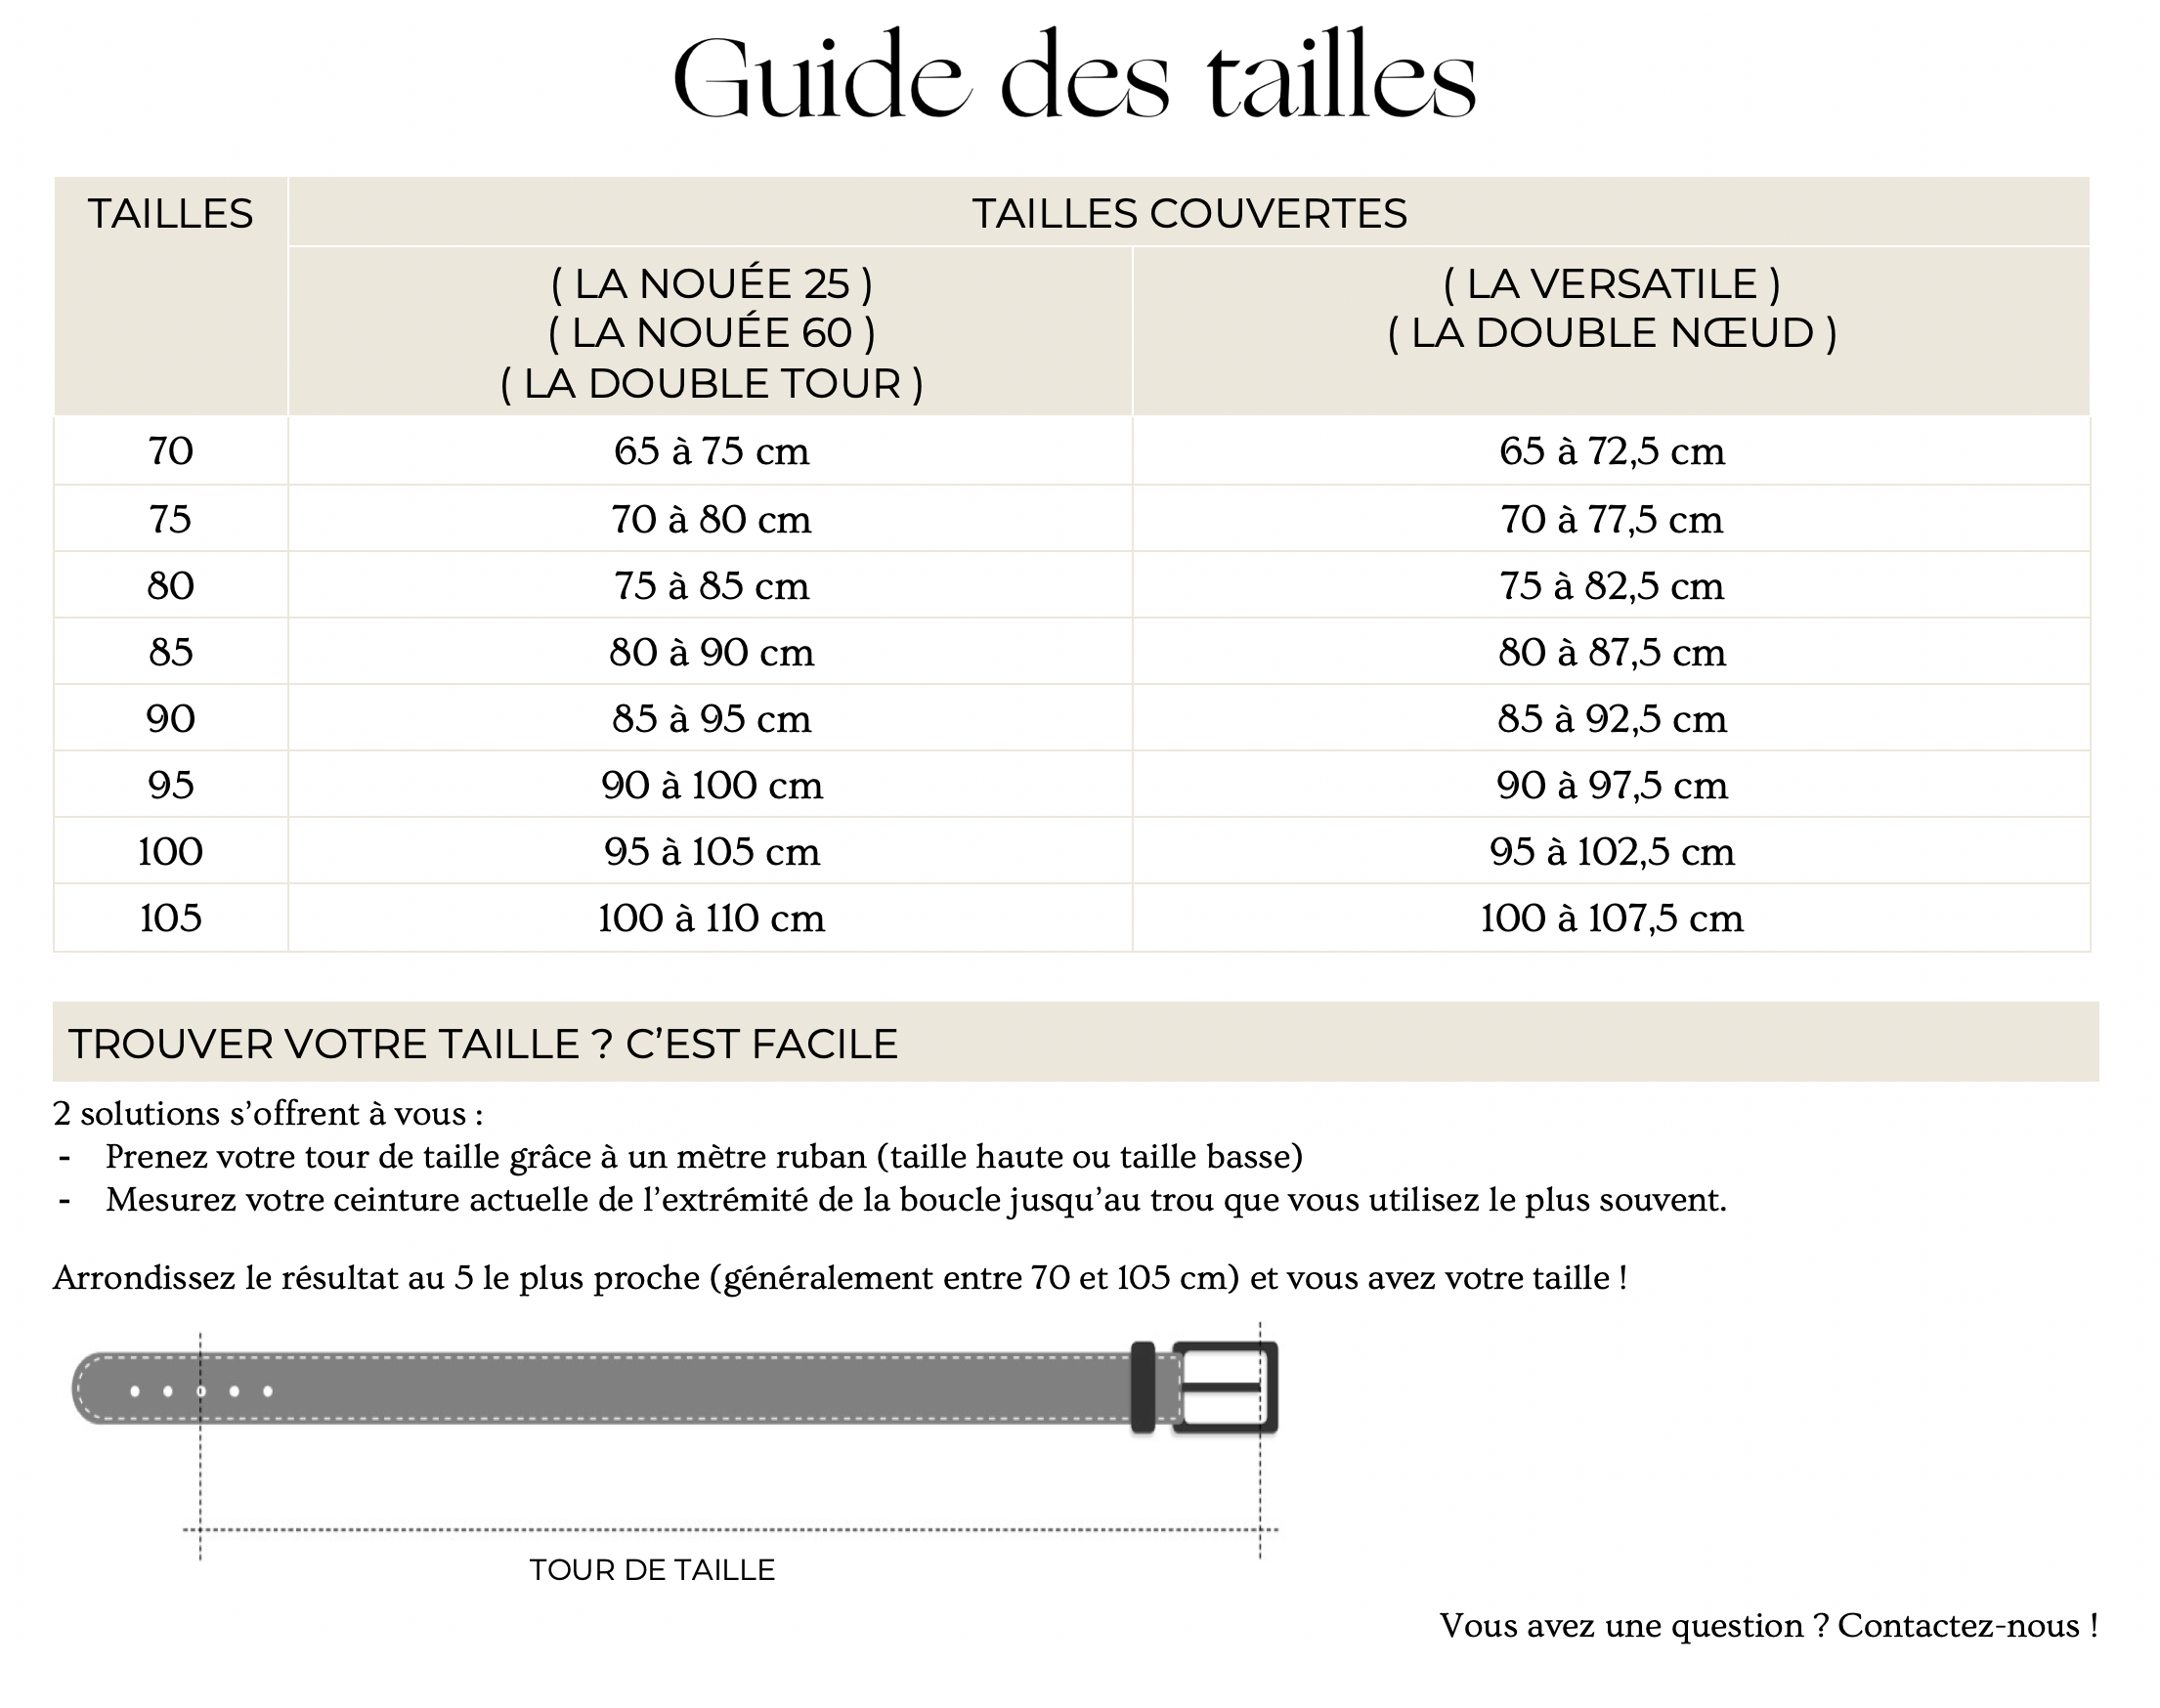 IMG - Guide des tailles